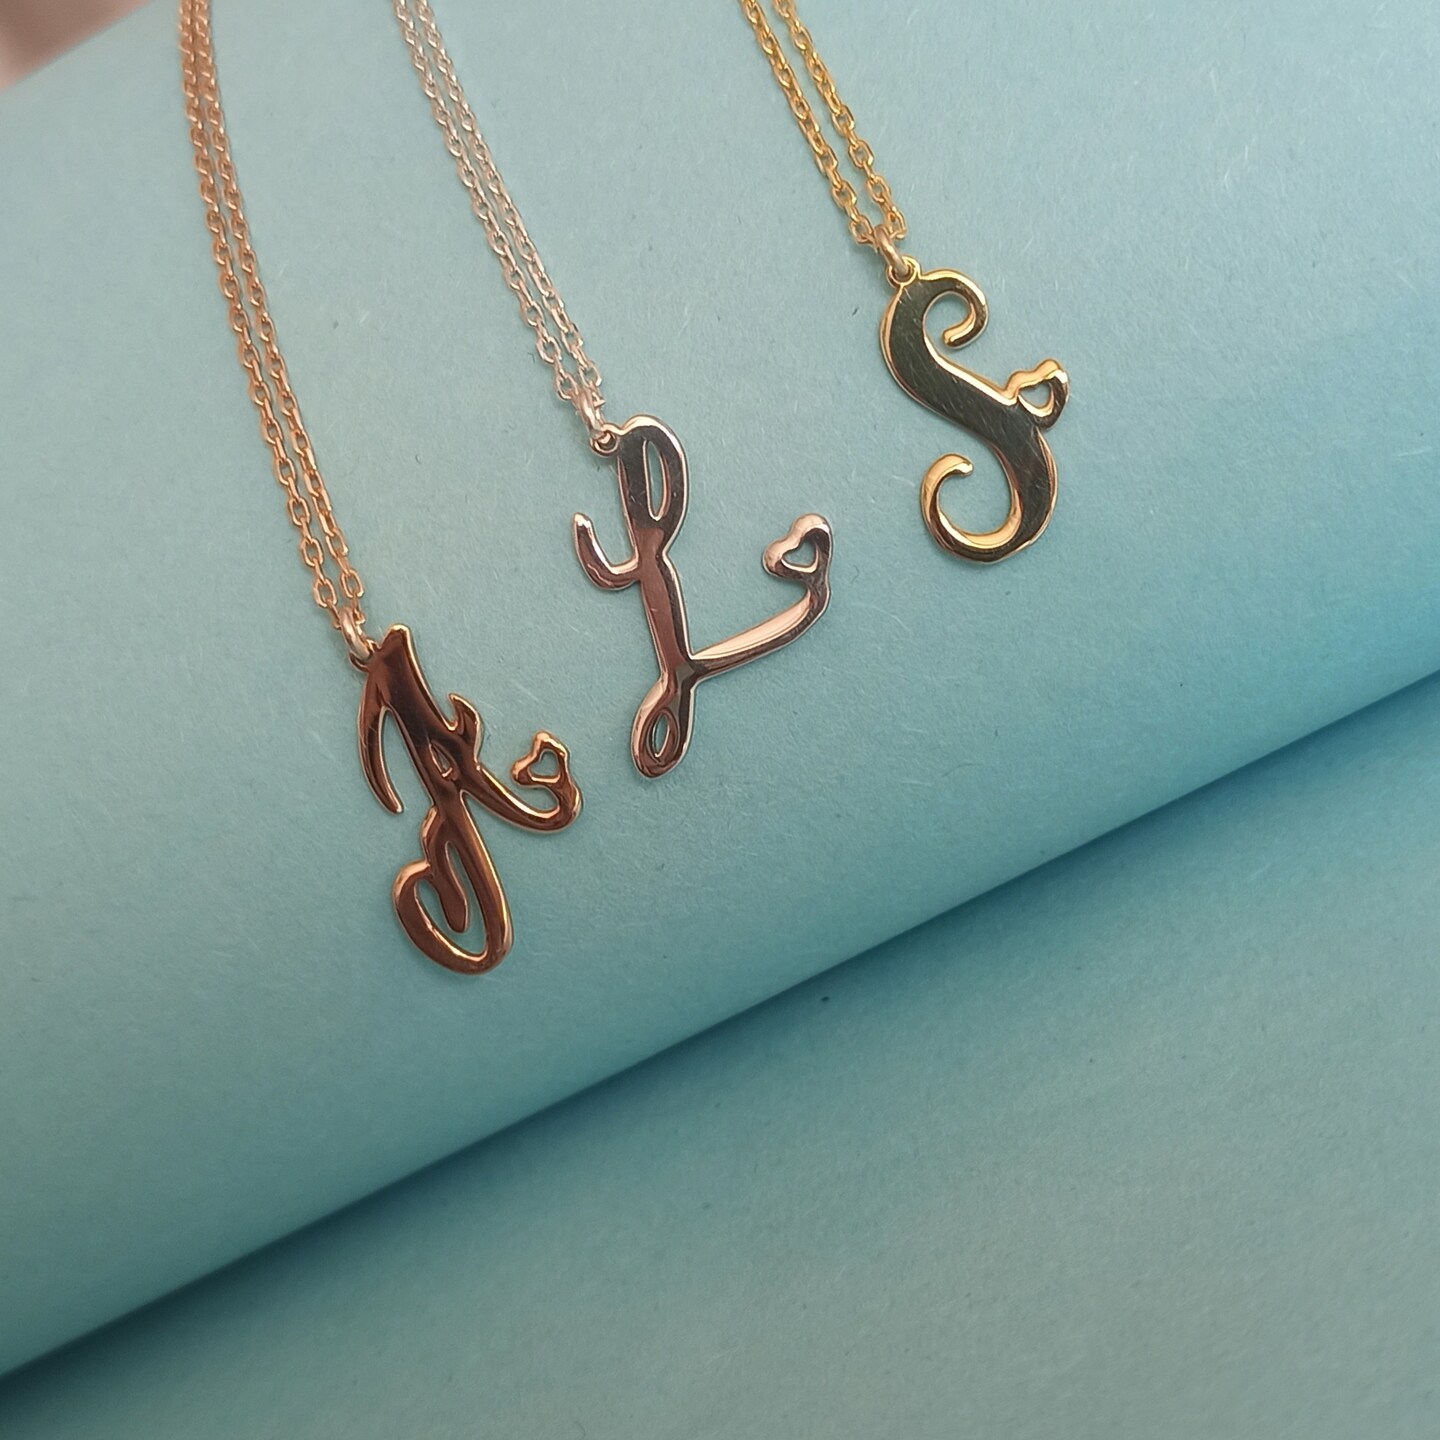 Personalized Sideways Jewelry Initial Letter Necklaces Minimalist Silver  Paw Symbol Mom Wife Girlfriend Woman Mama Tiny Christmas Gift - Etsy |  Pretty jewelry necklaces, Necklace, Stylish jewelry